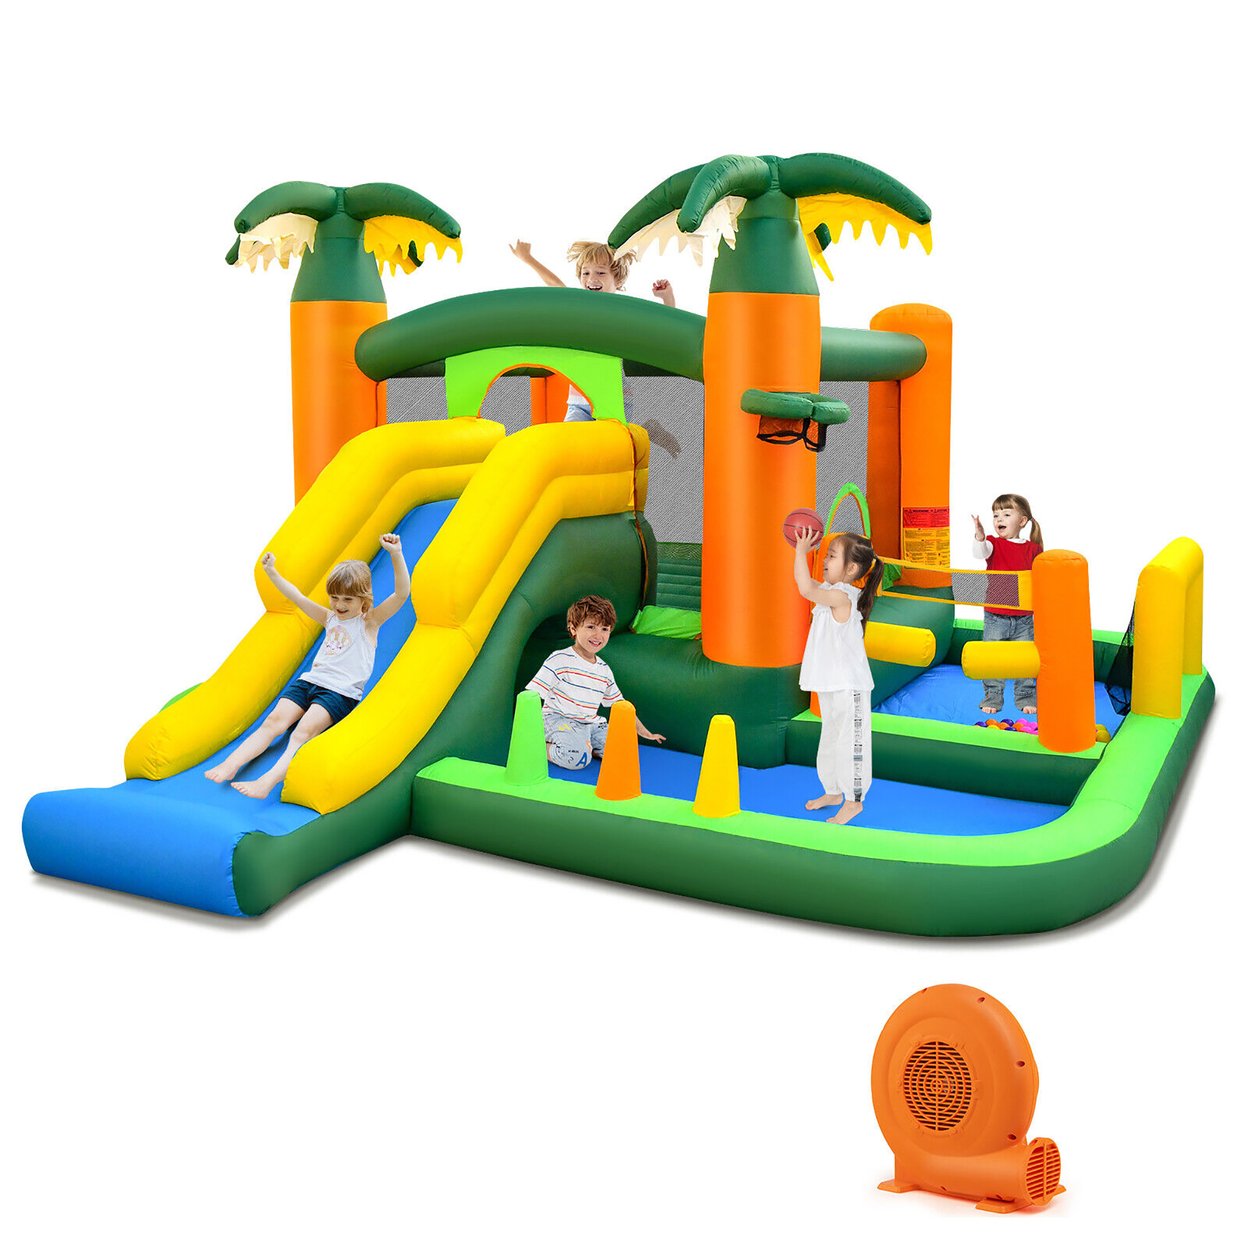 Tropical Inflatable Bounce Castle, 8-in-1 Giant Jumping House W/ 750W Blower